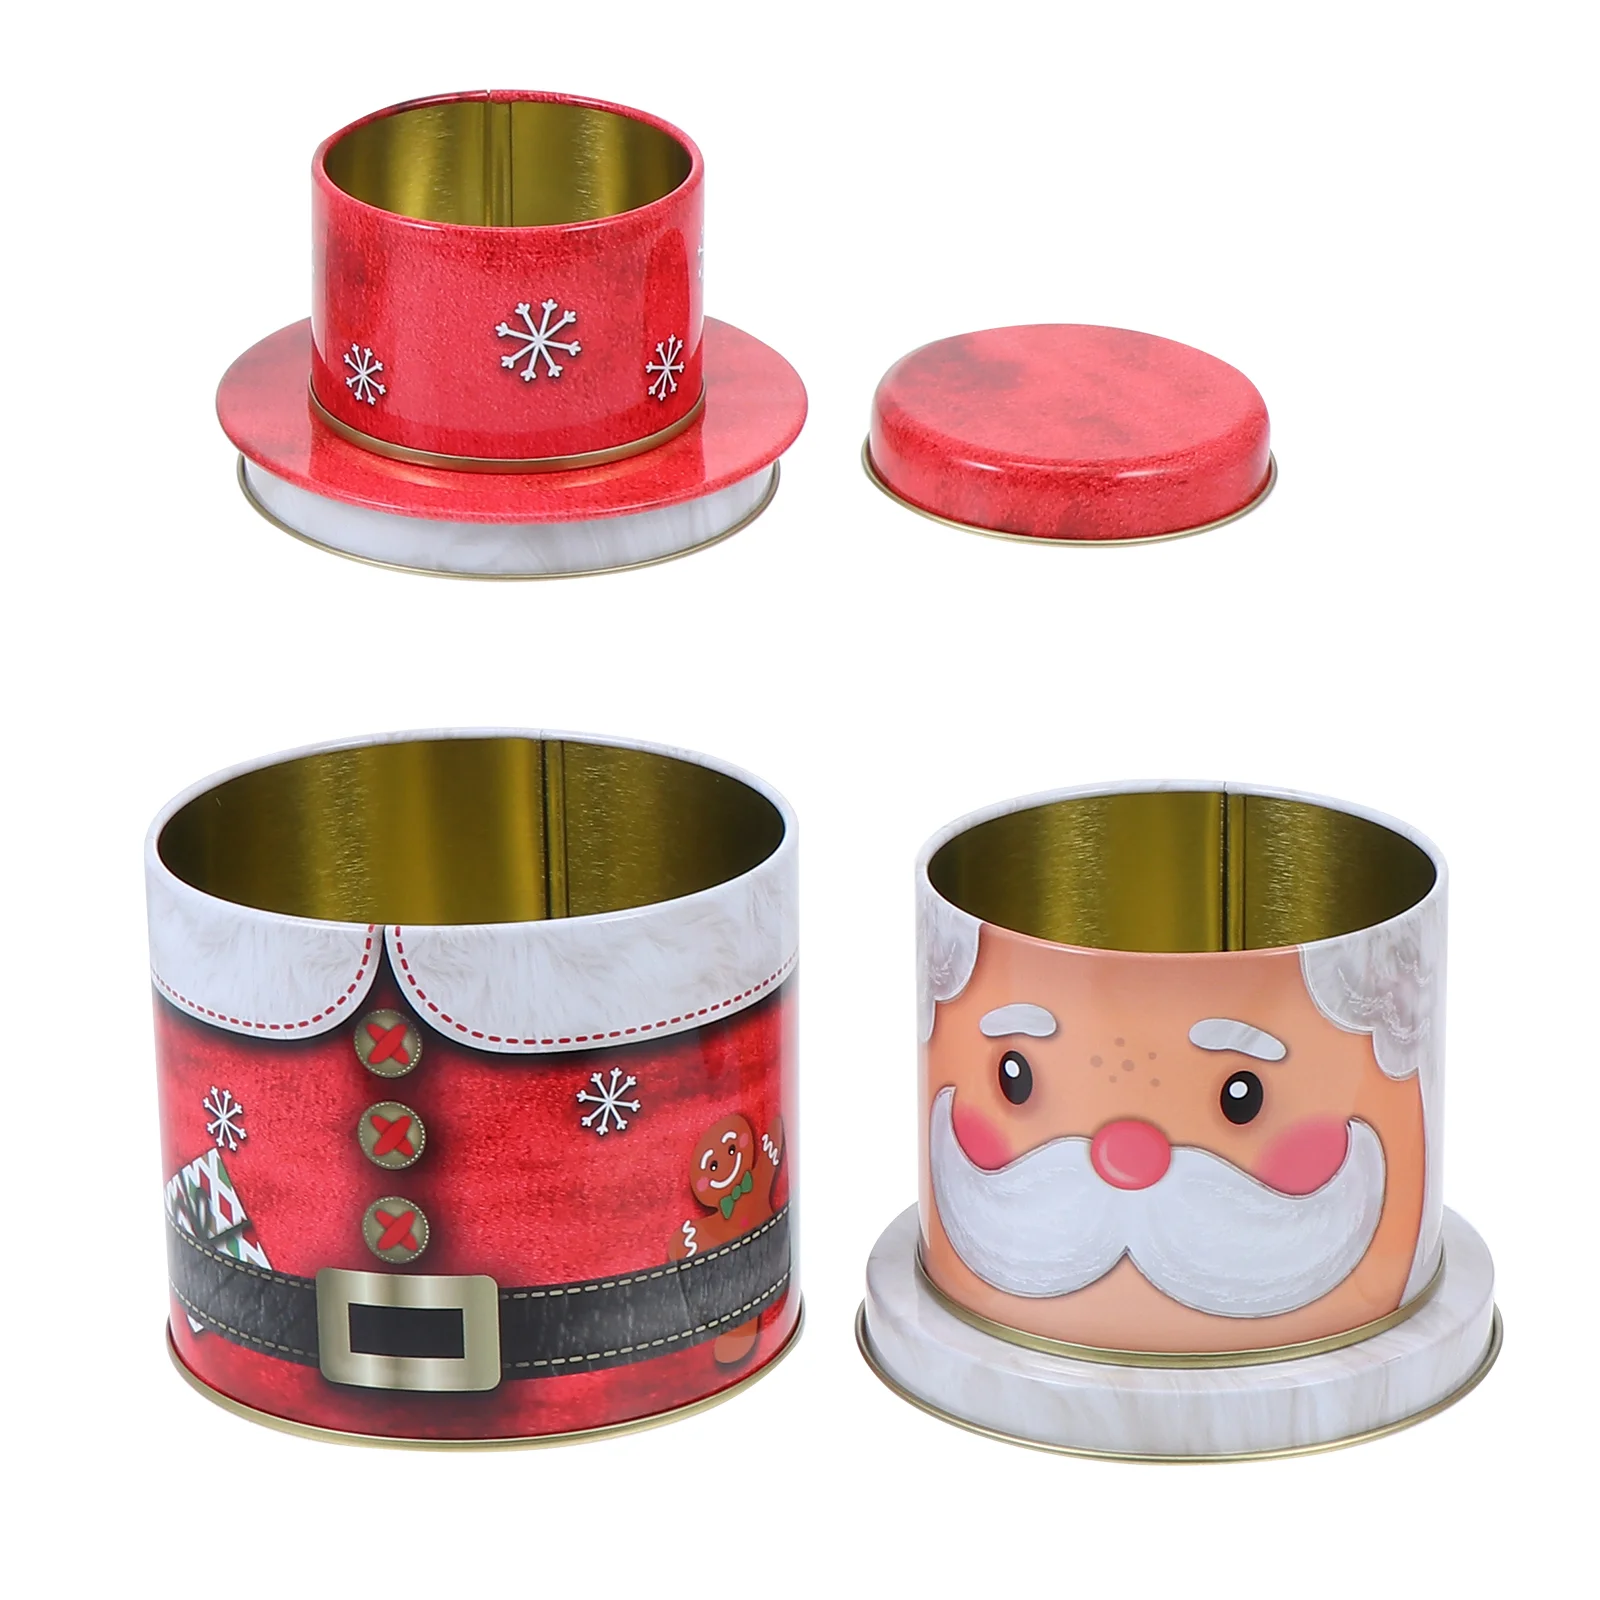 

Christmas Cookie Candy Tins Box Gift Lidstin Tinplate Jar Containers Giving Boxes Holiday Santa Storage Jars Biscuits Xmas Empty